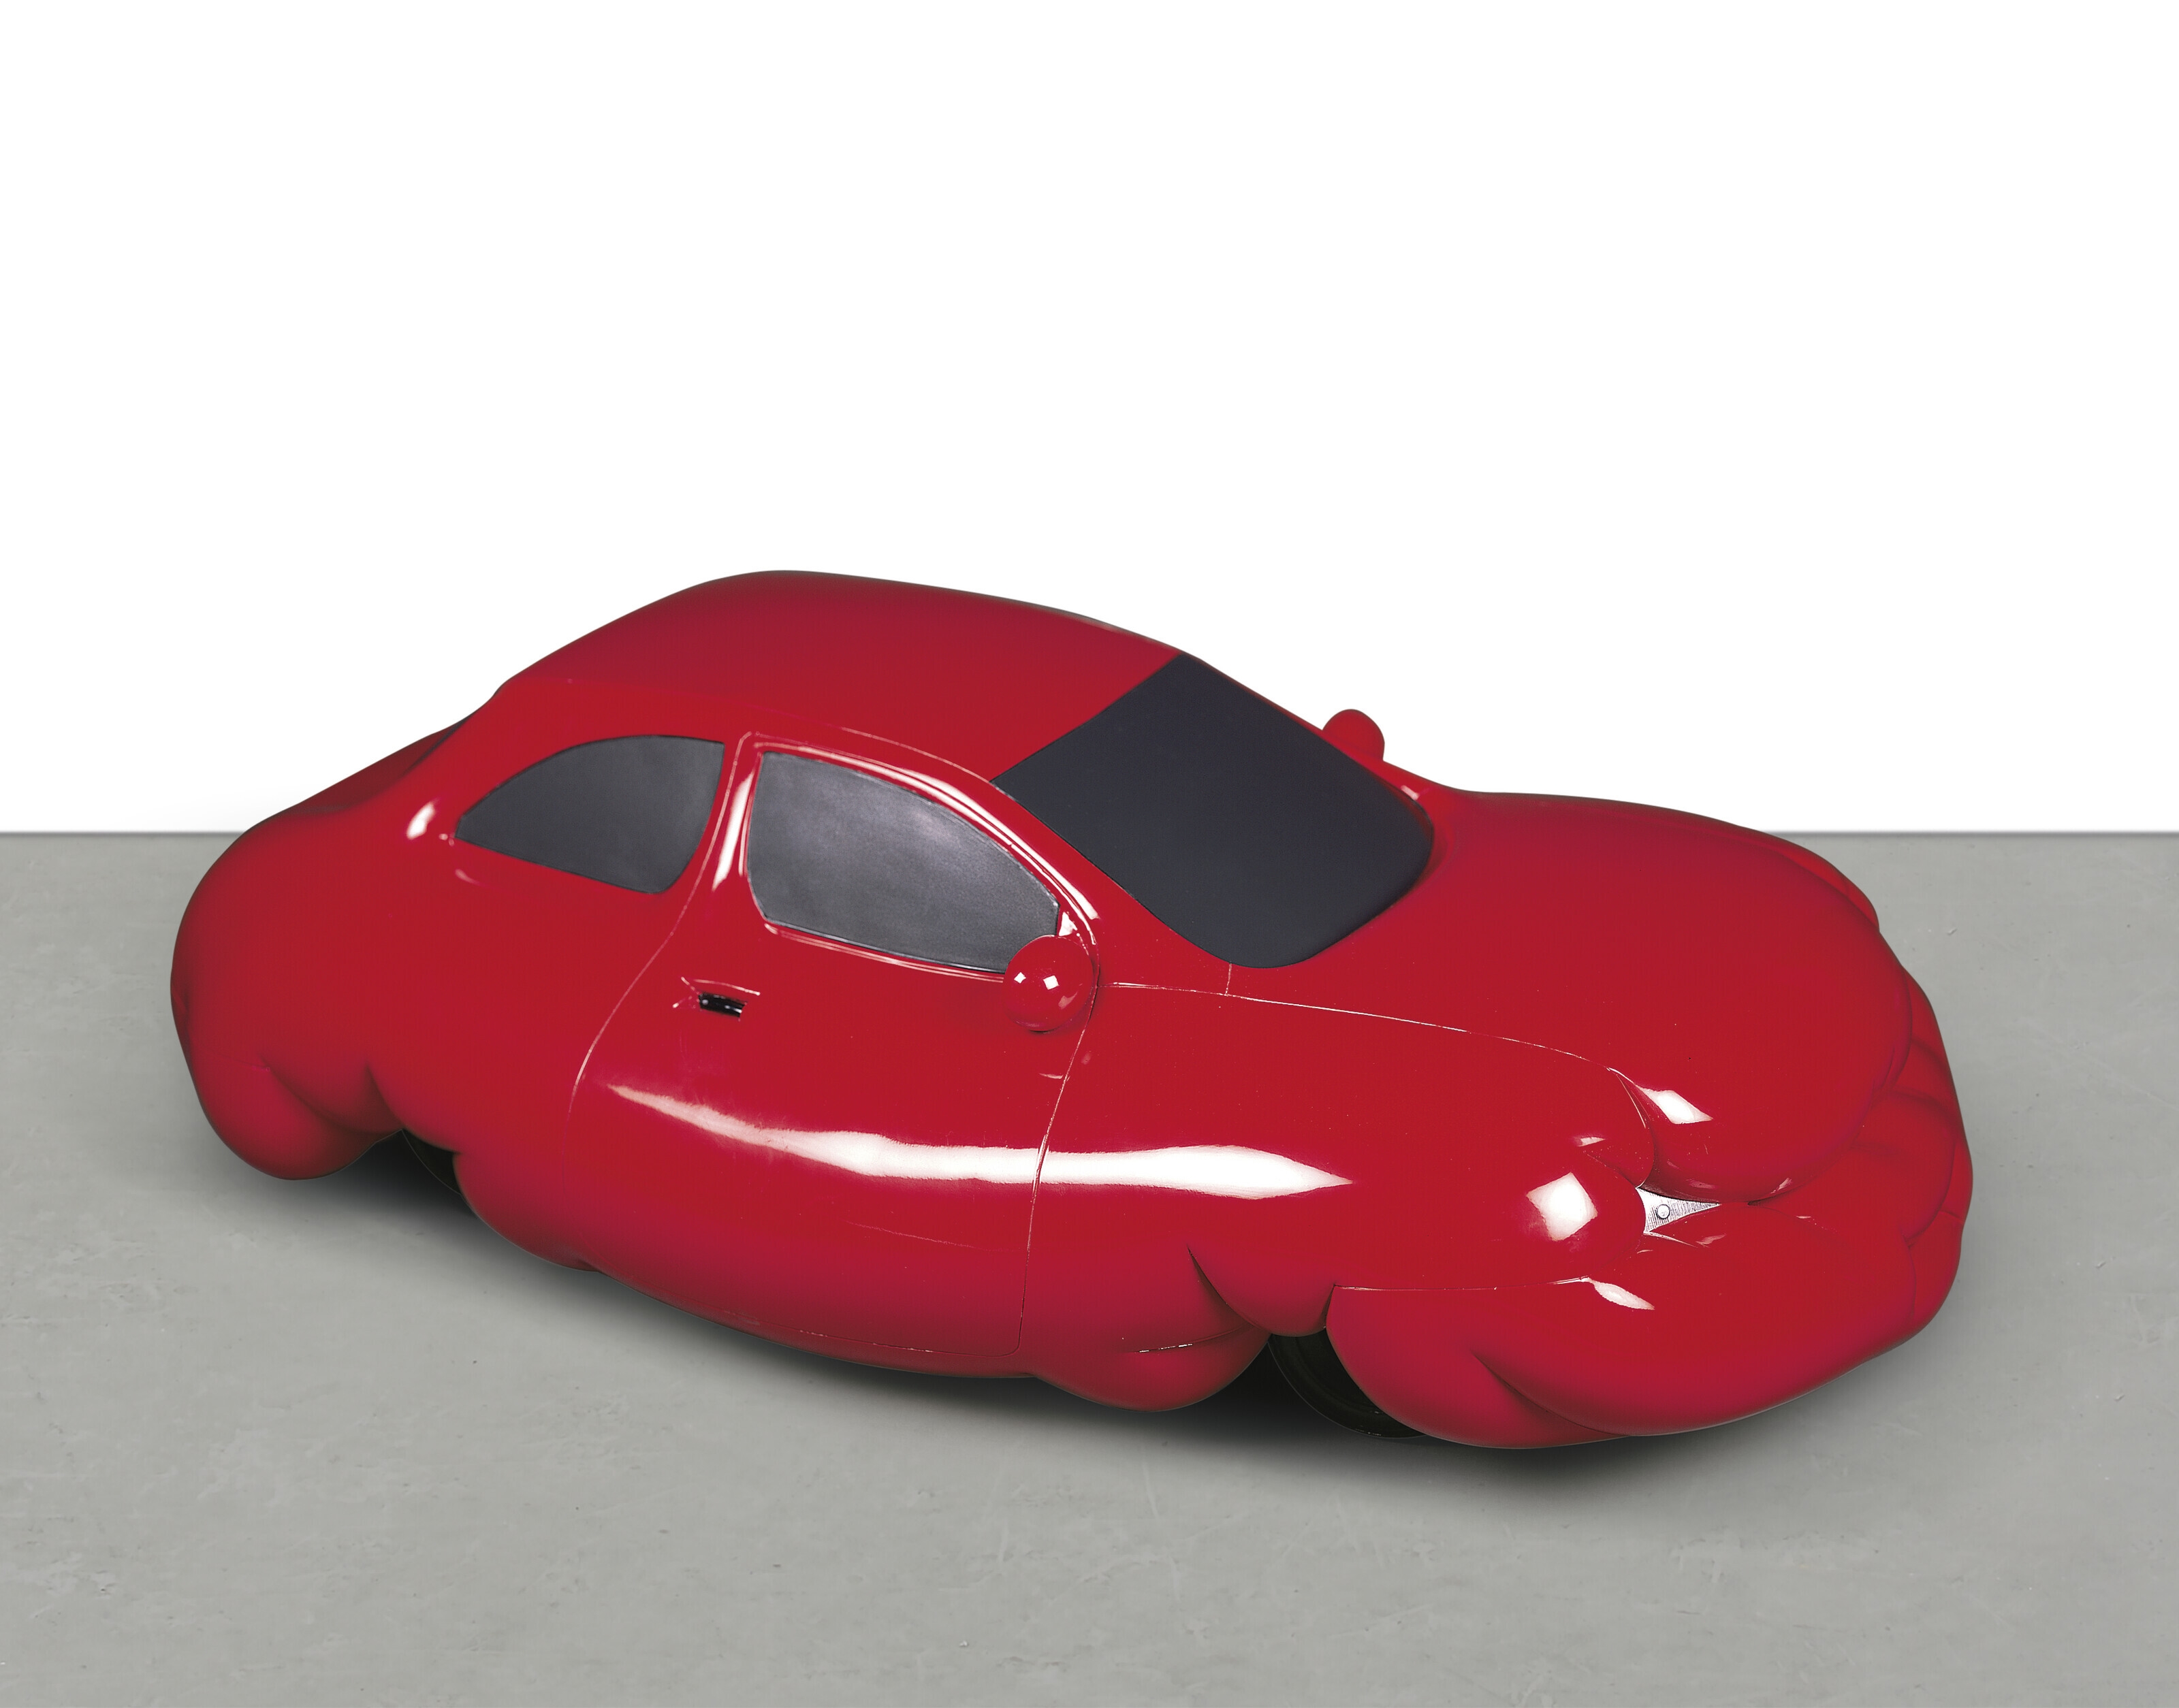 Artwork by Erwin Wurm, Fat Car, Made of metallic paint, styrofoam and polyester